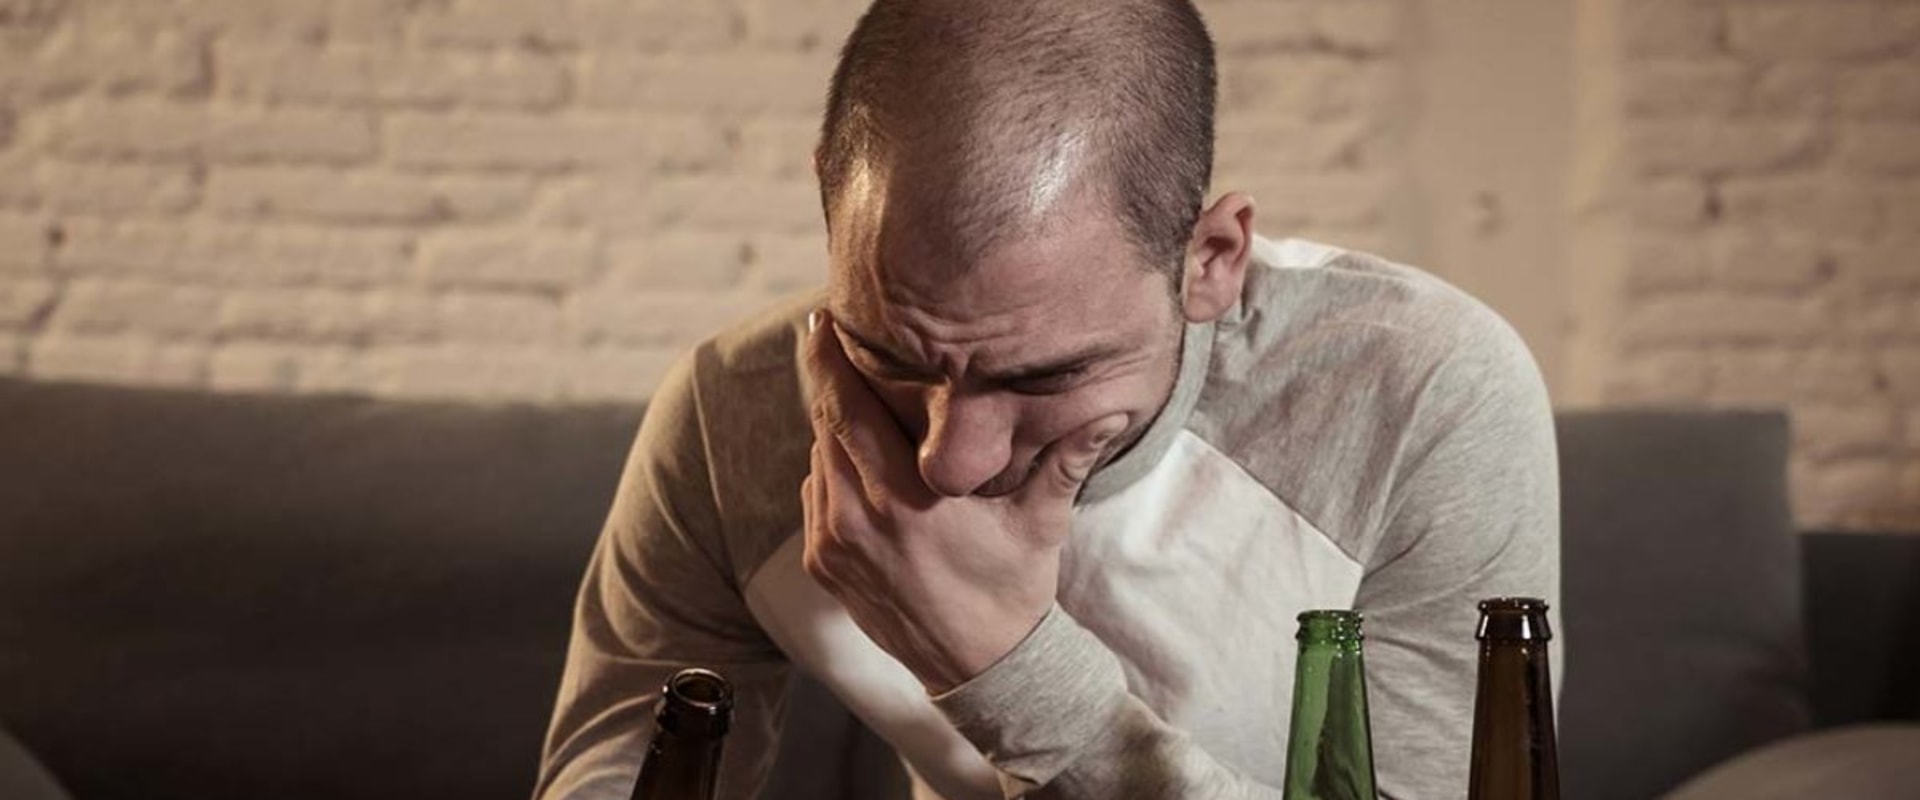 Why Alcohol Withdrawal is Dangerous and How to Detox Safely